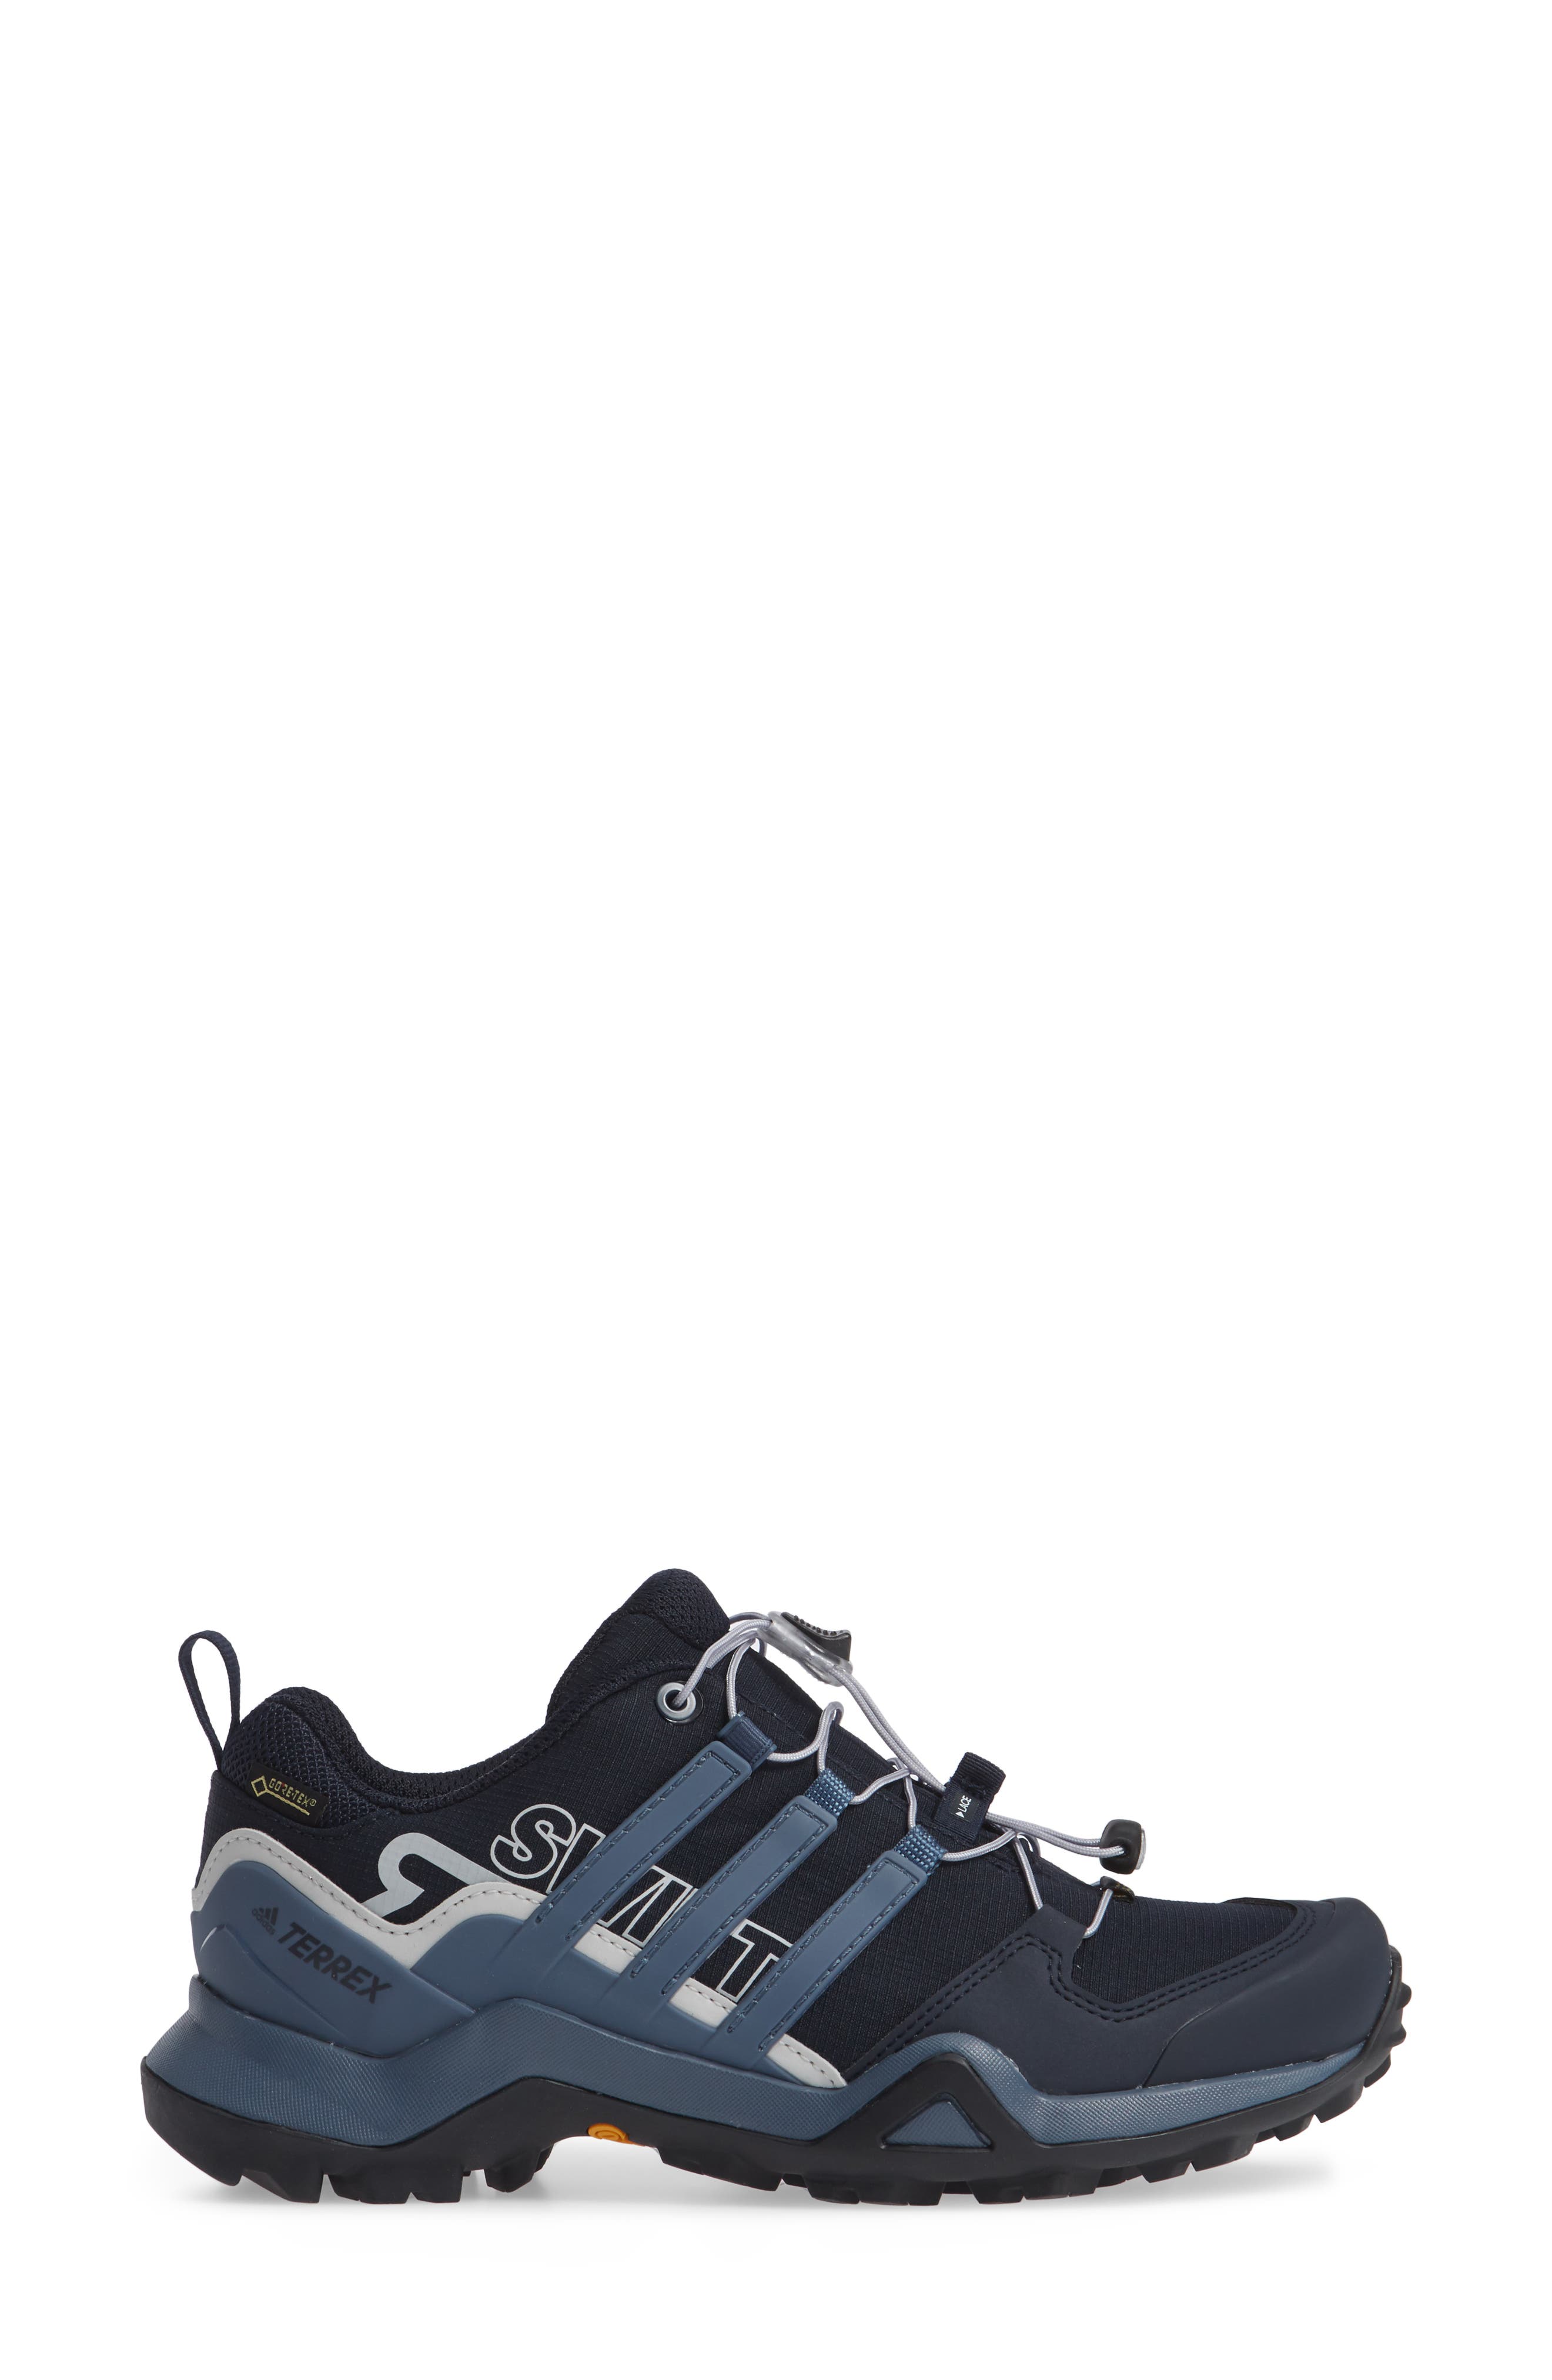 adidas lace bungee gore tex